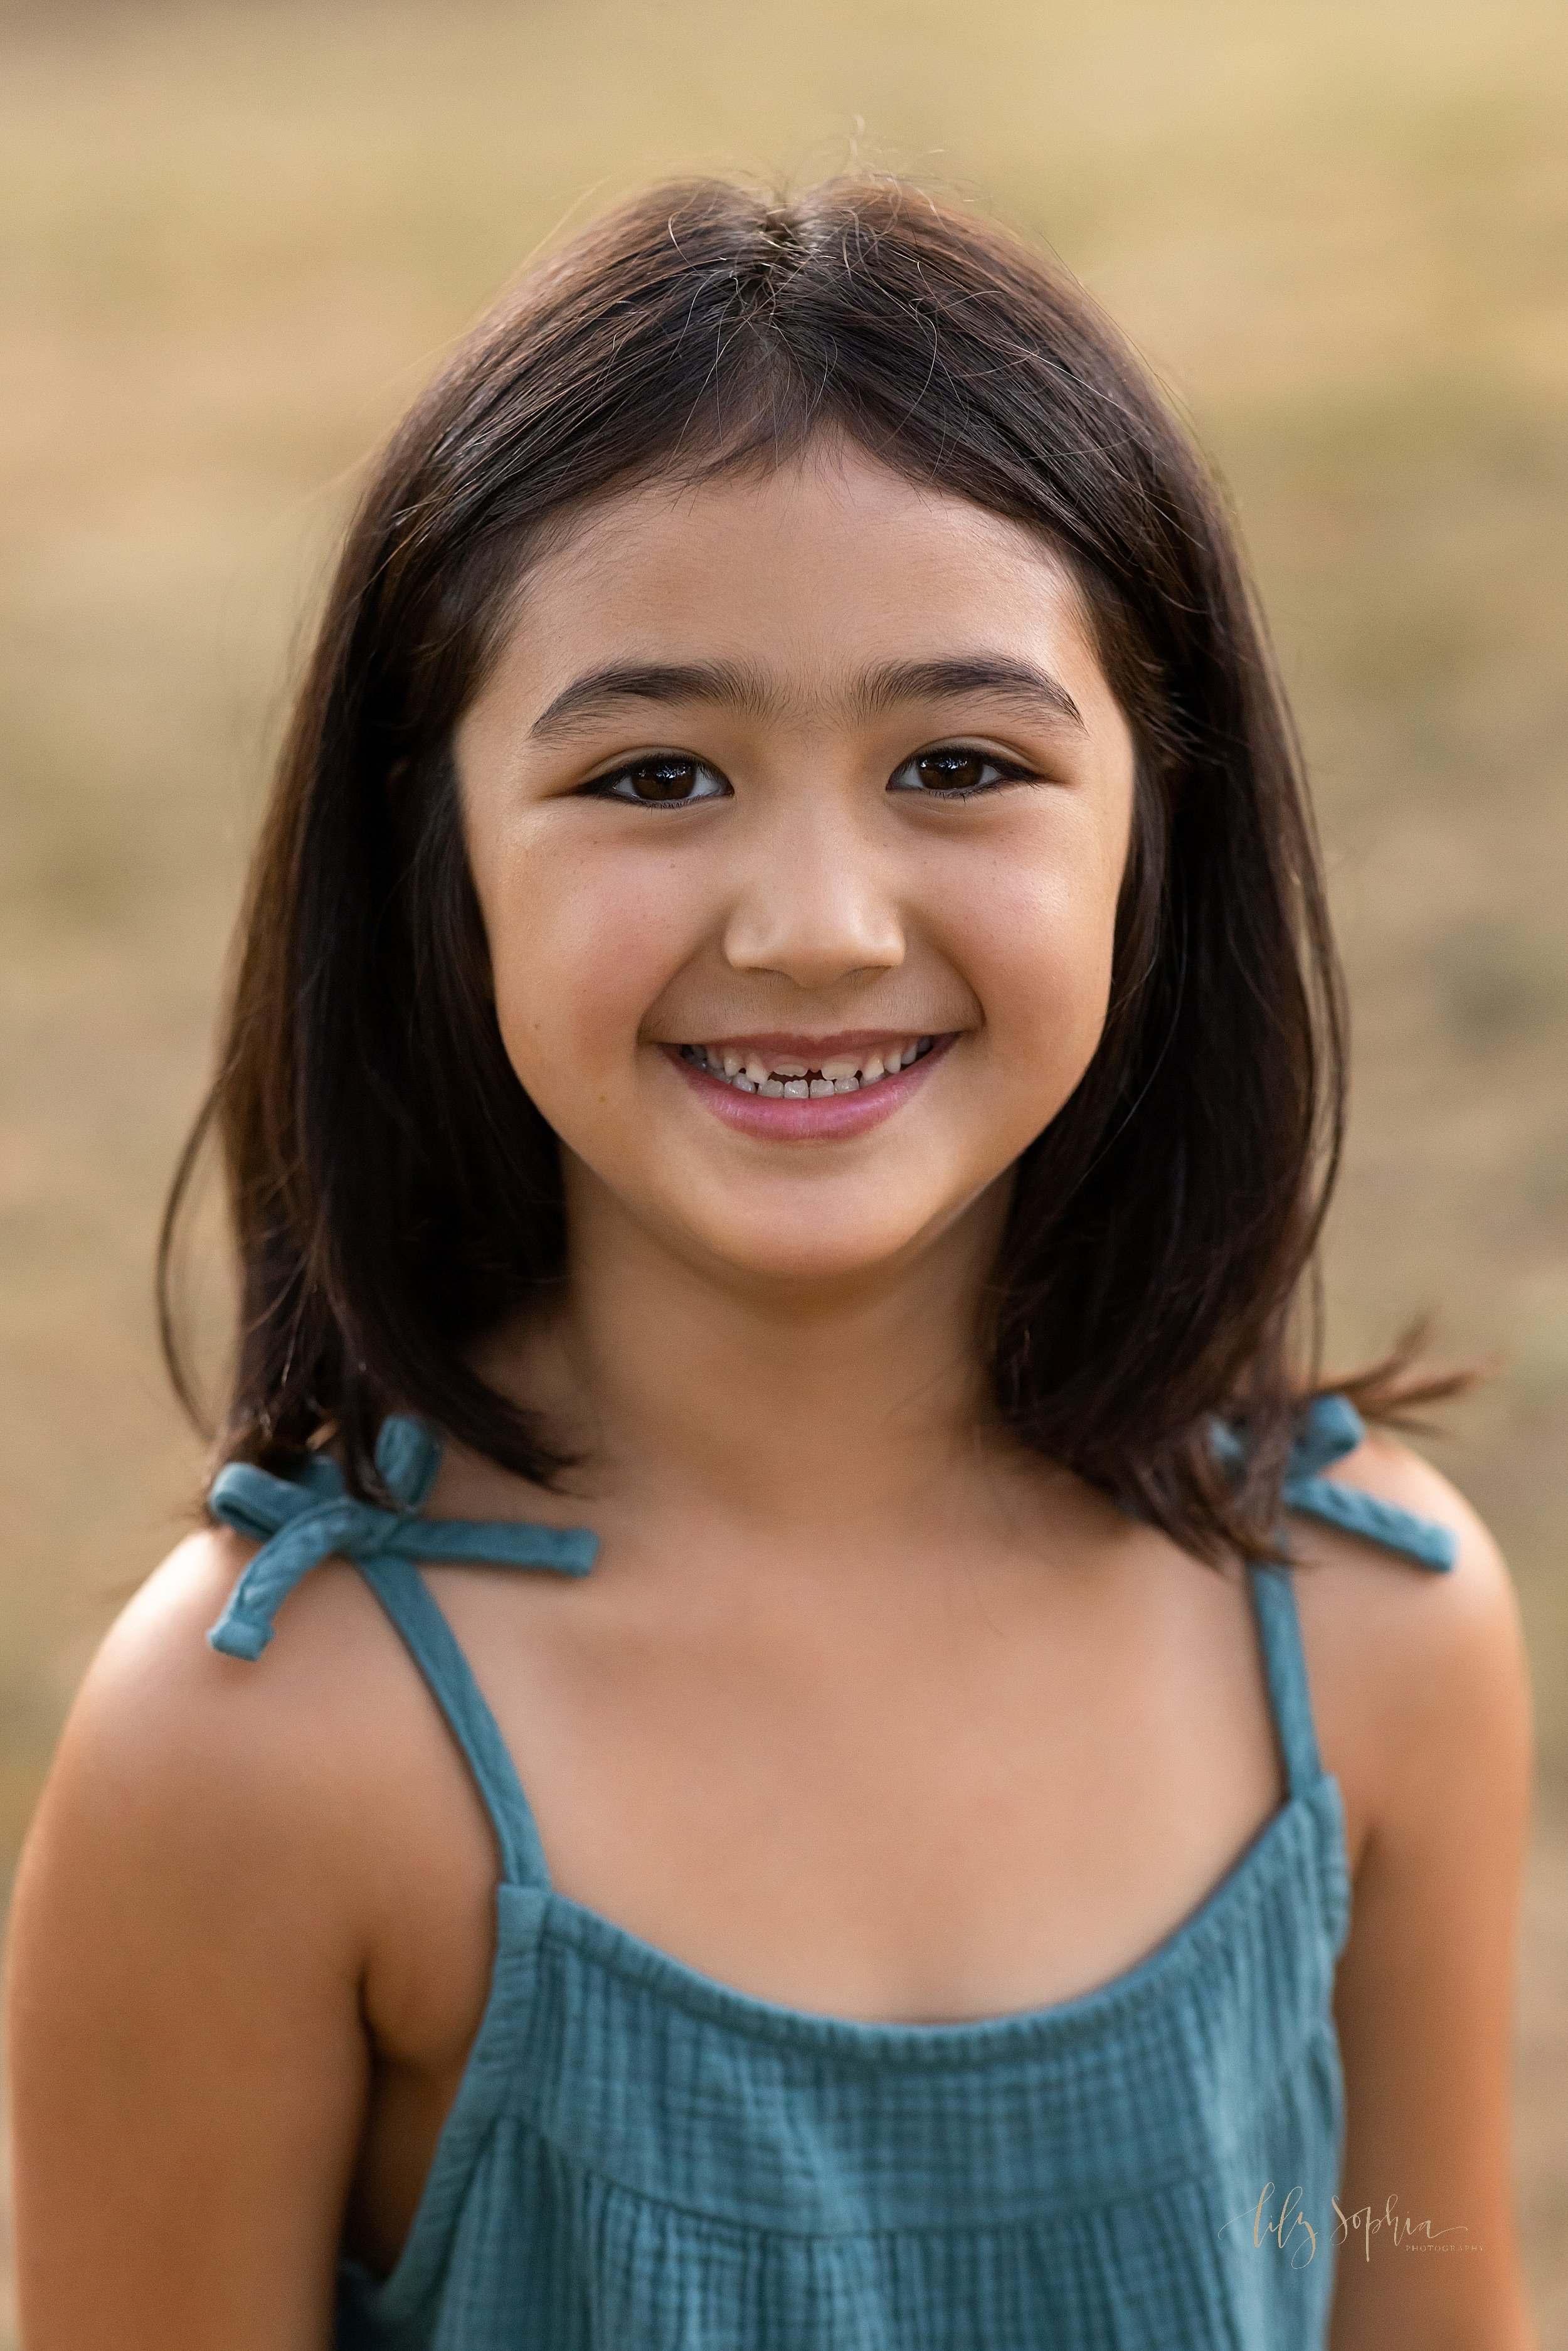  Close-up portrait of an Asian girl as she smiles showing her permanent teeth growing in taken in a park near Atlanta, Georgia at sunset. 